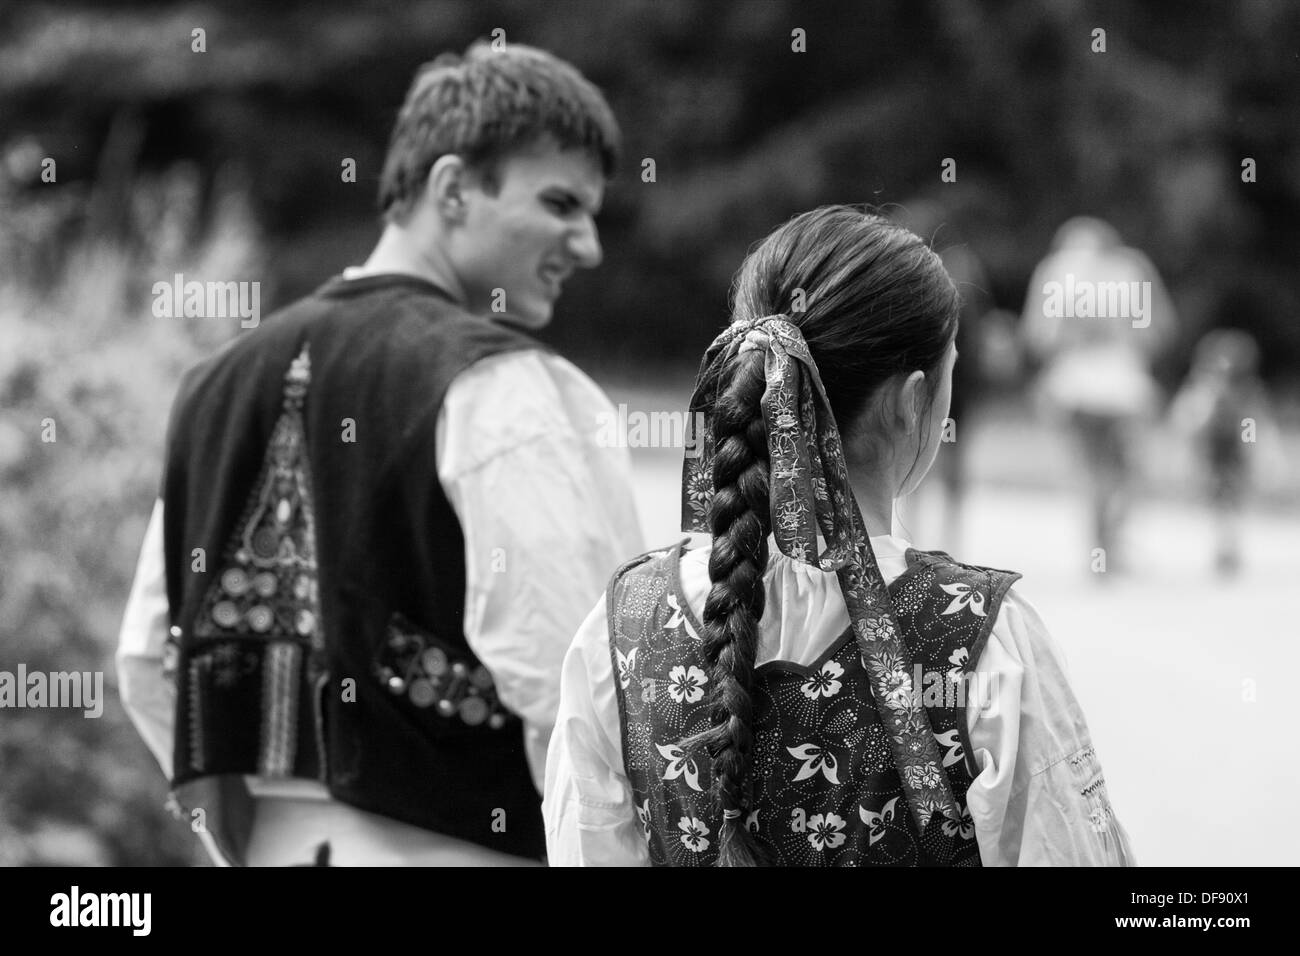 Young girl and man in folk costume Stock Photo